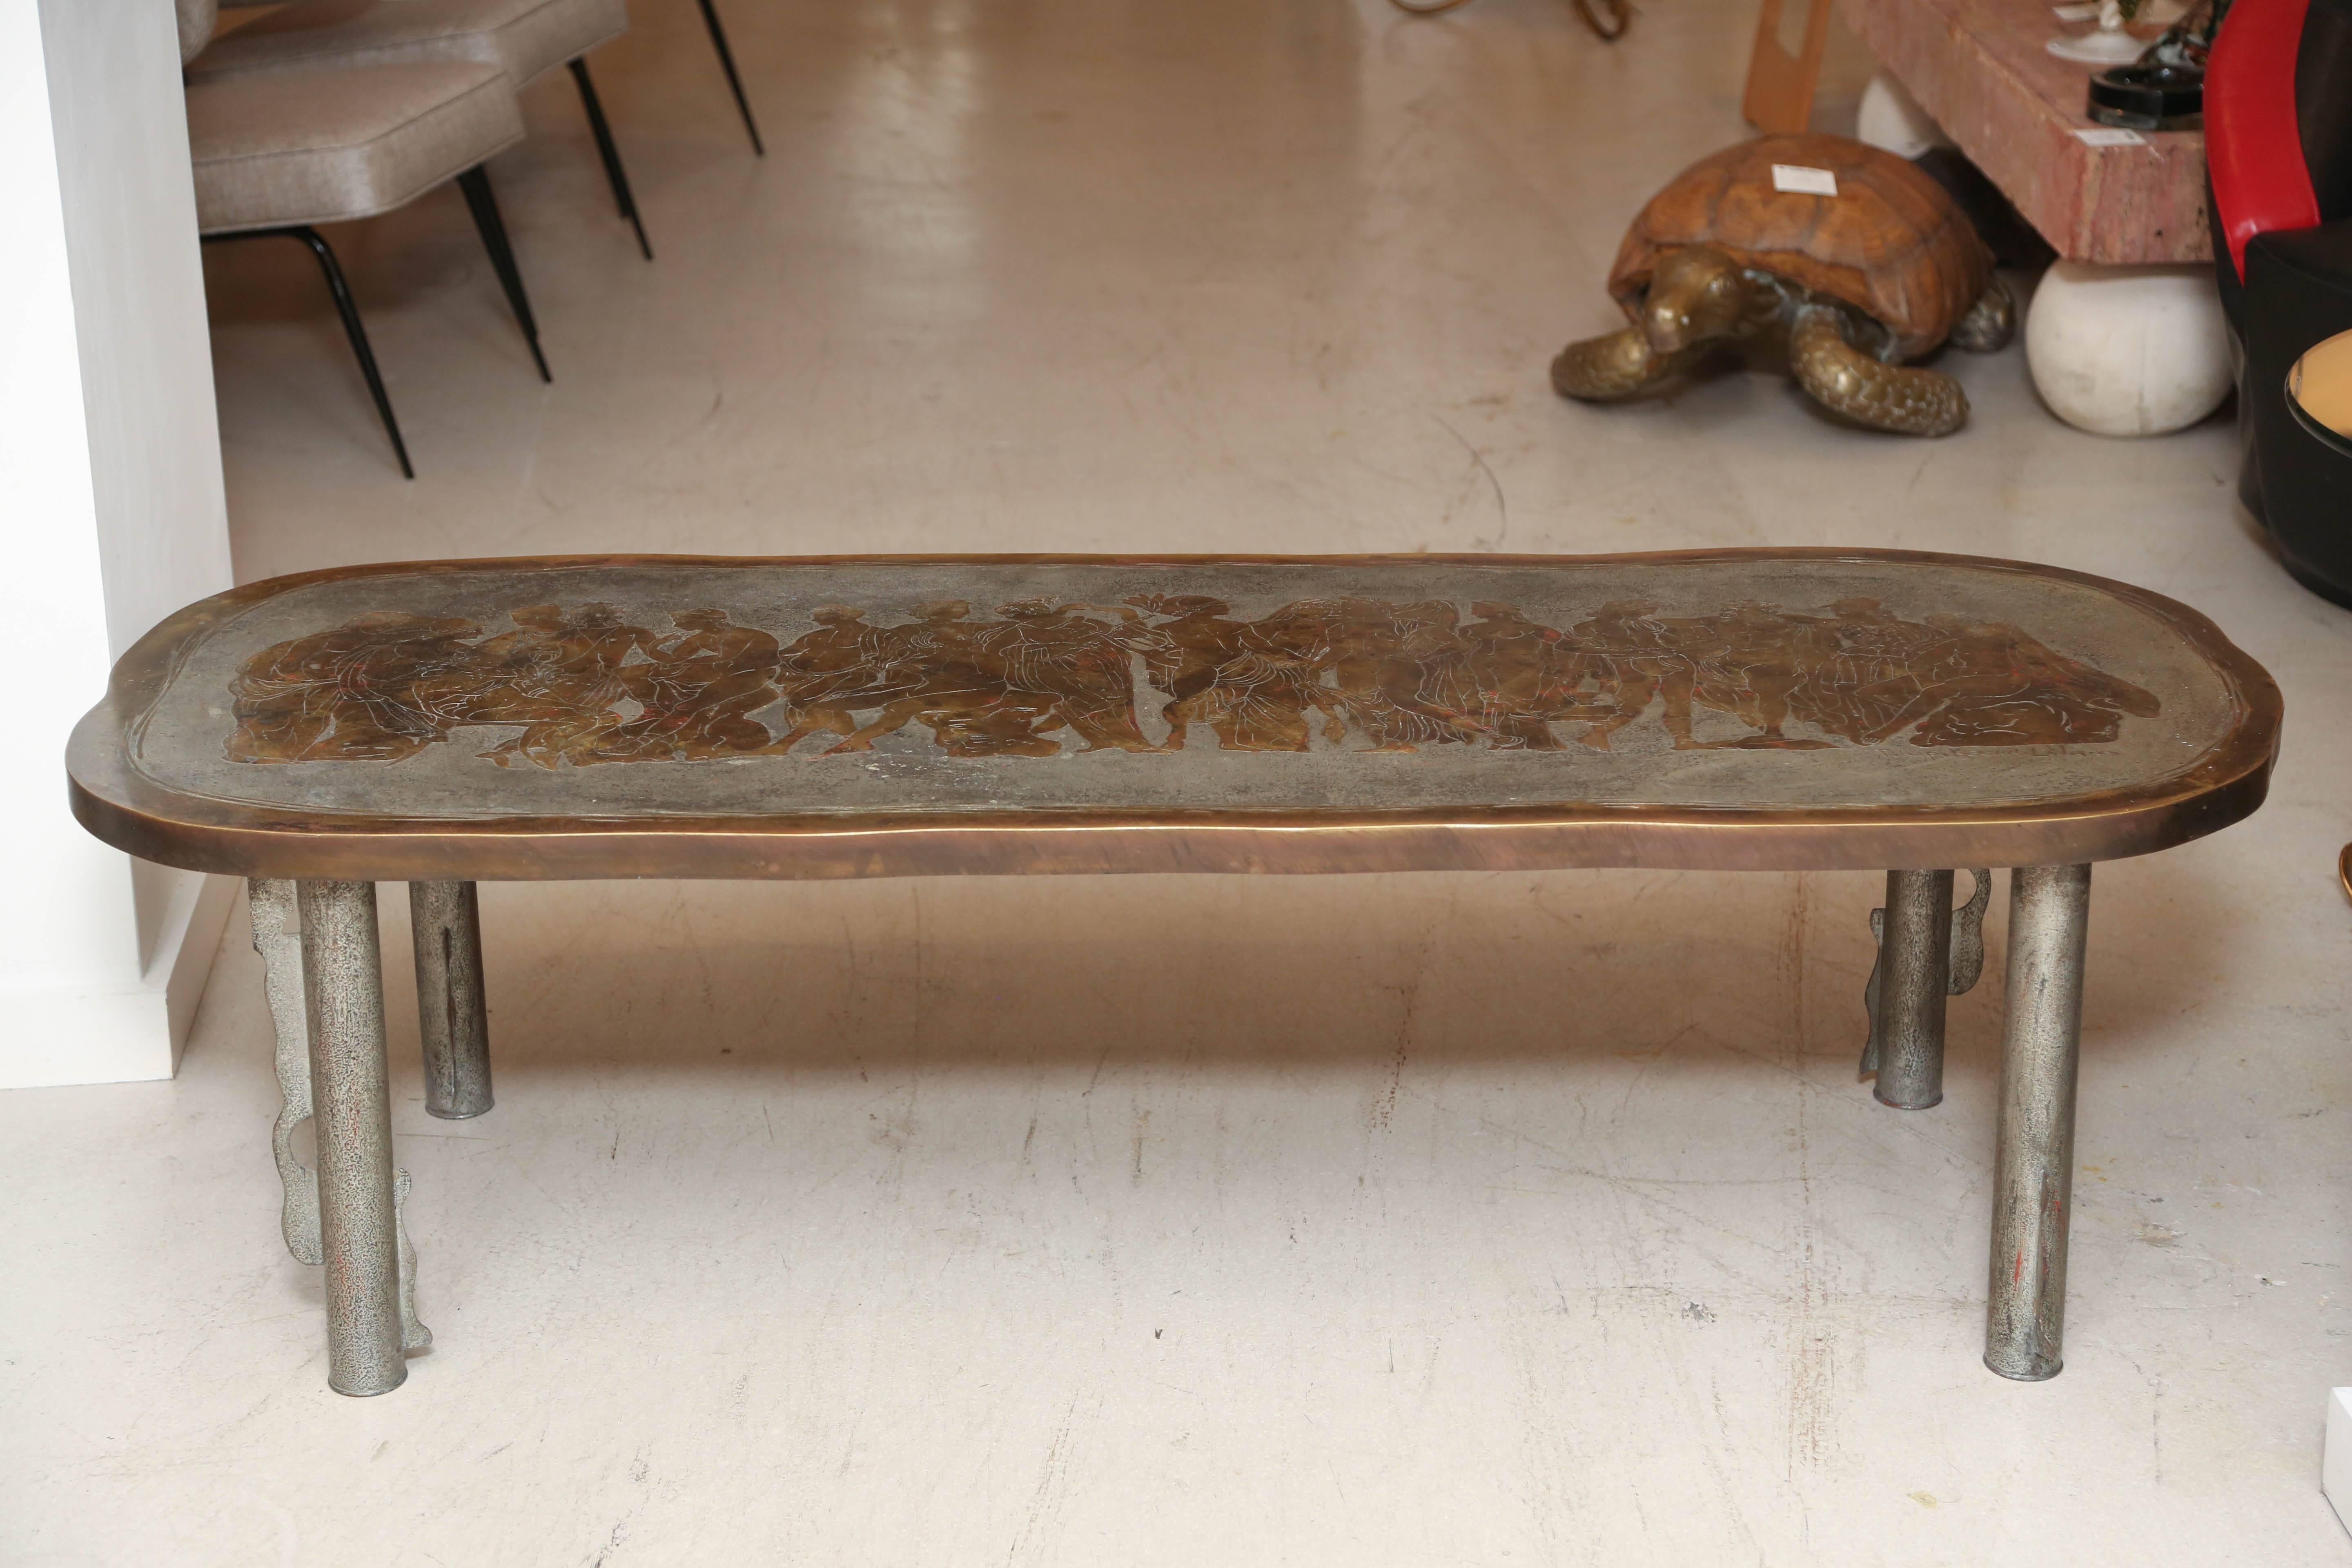 Signed oval bronze coffee table by Philip and Kelvin LaVerne. The table is entitled 'Romanesque